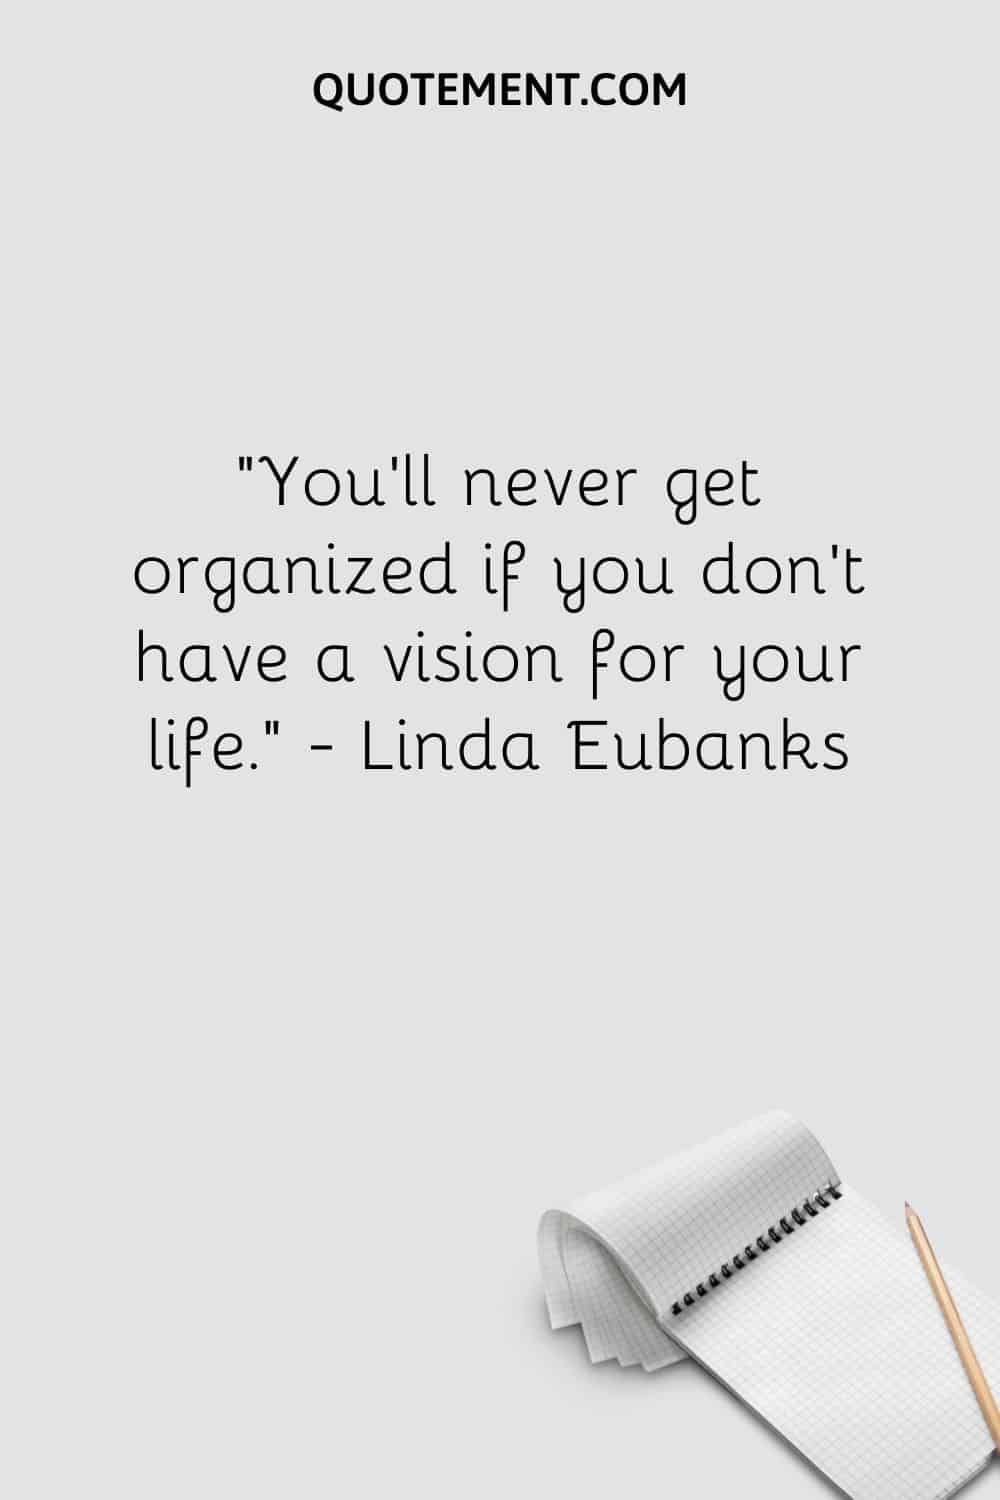 You’ll never get organized if you don’t have a vision for your life